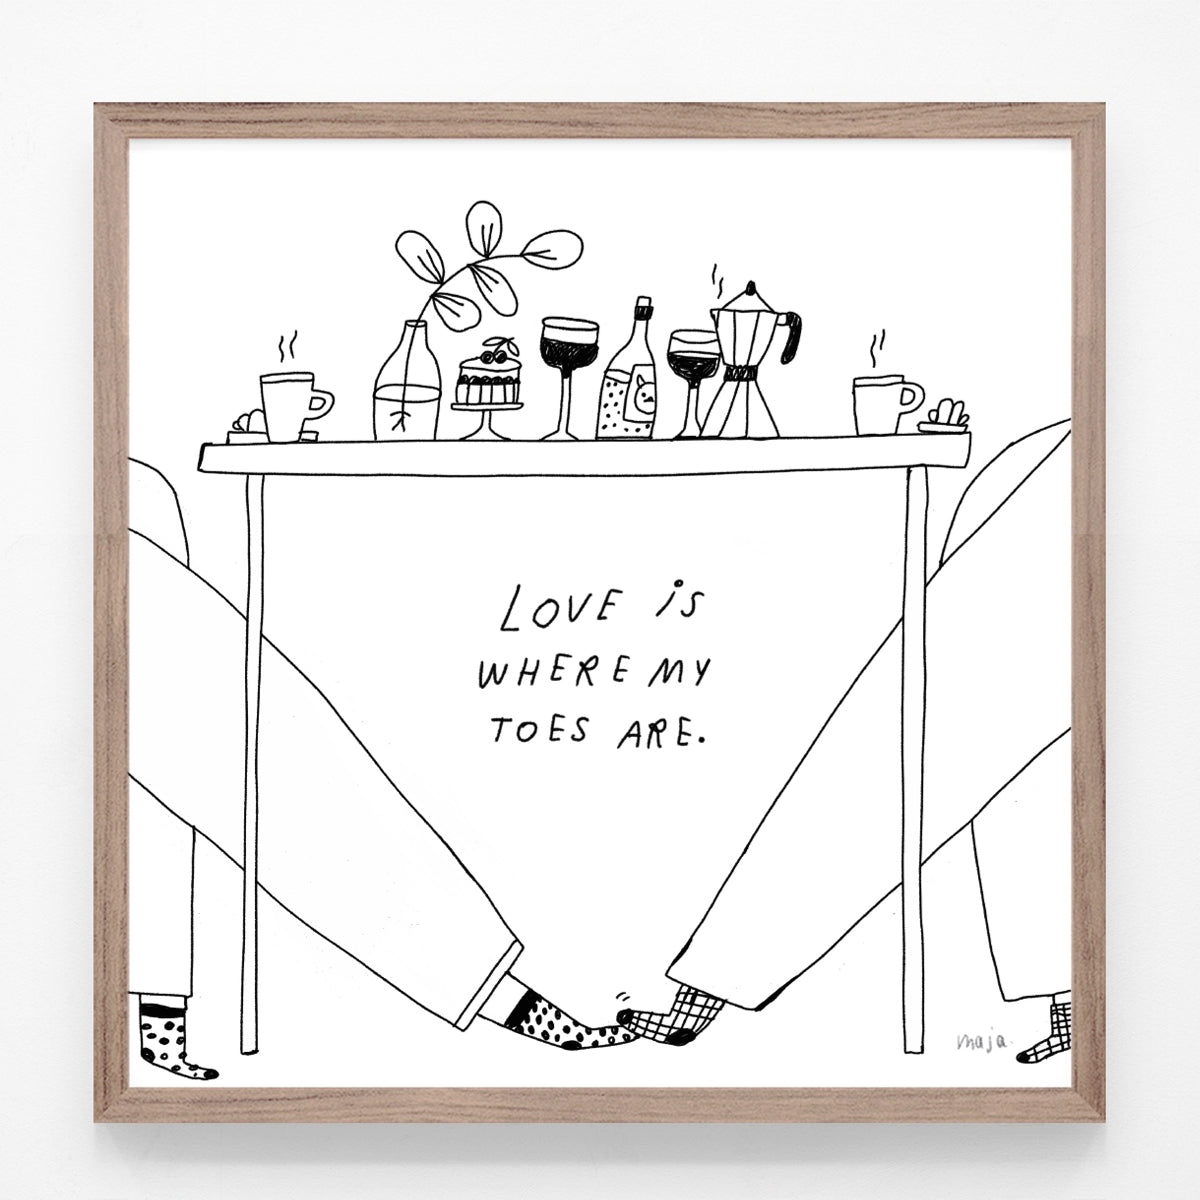 Love is where my toes are, print